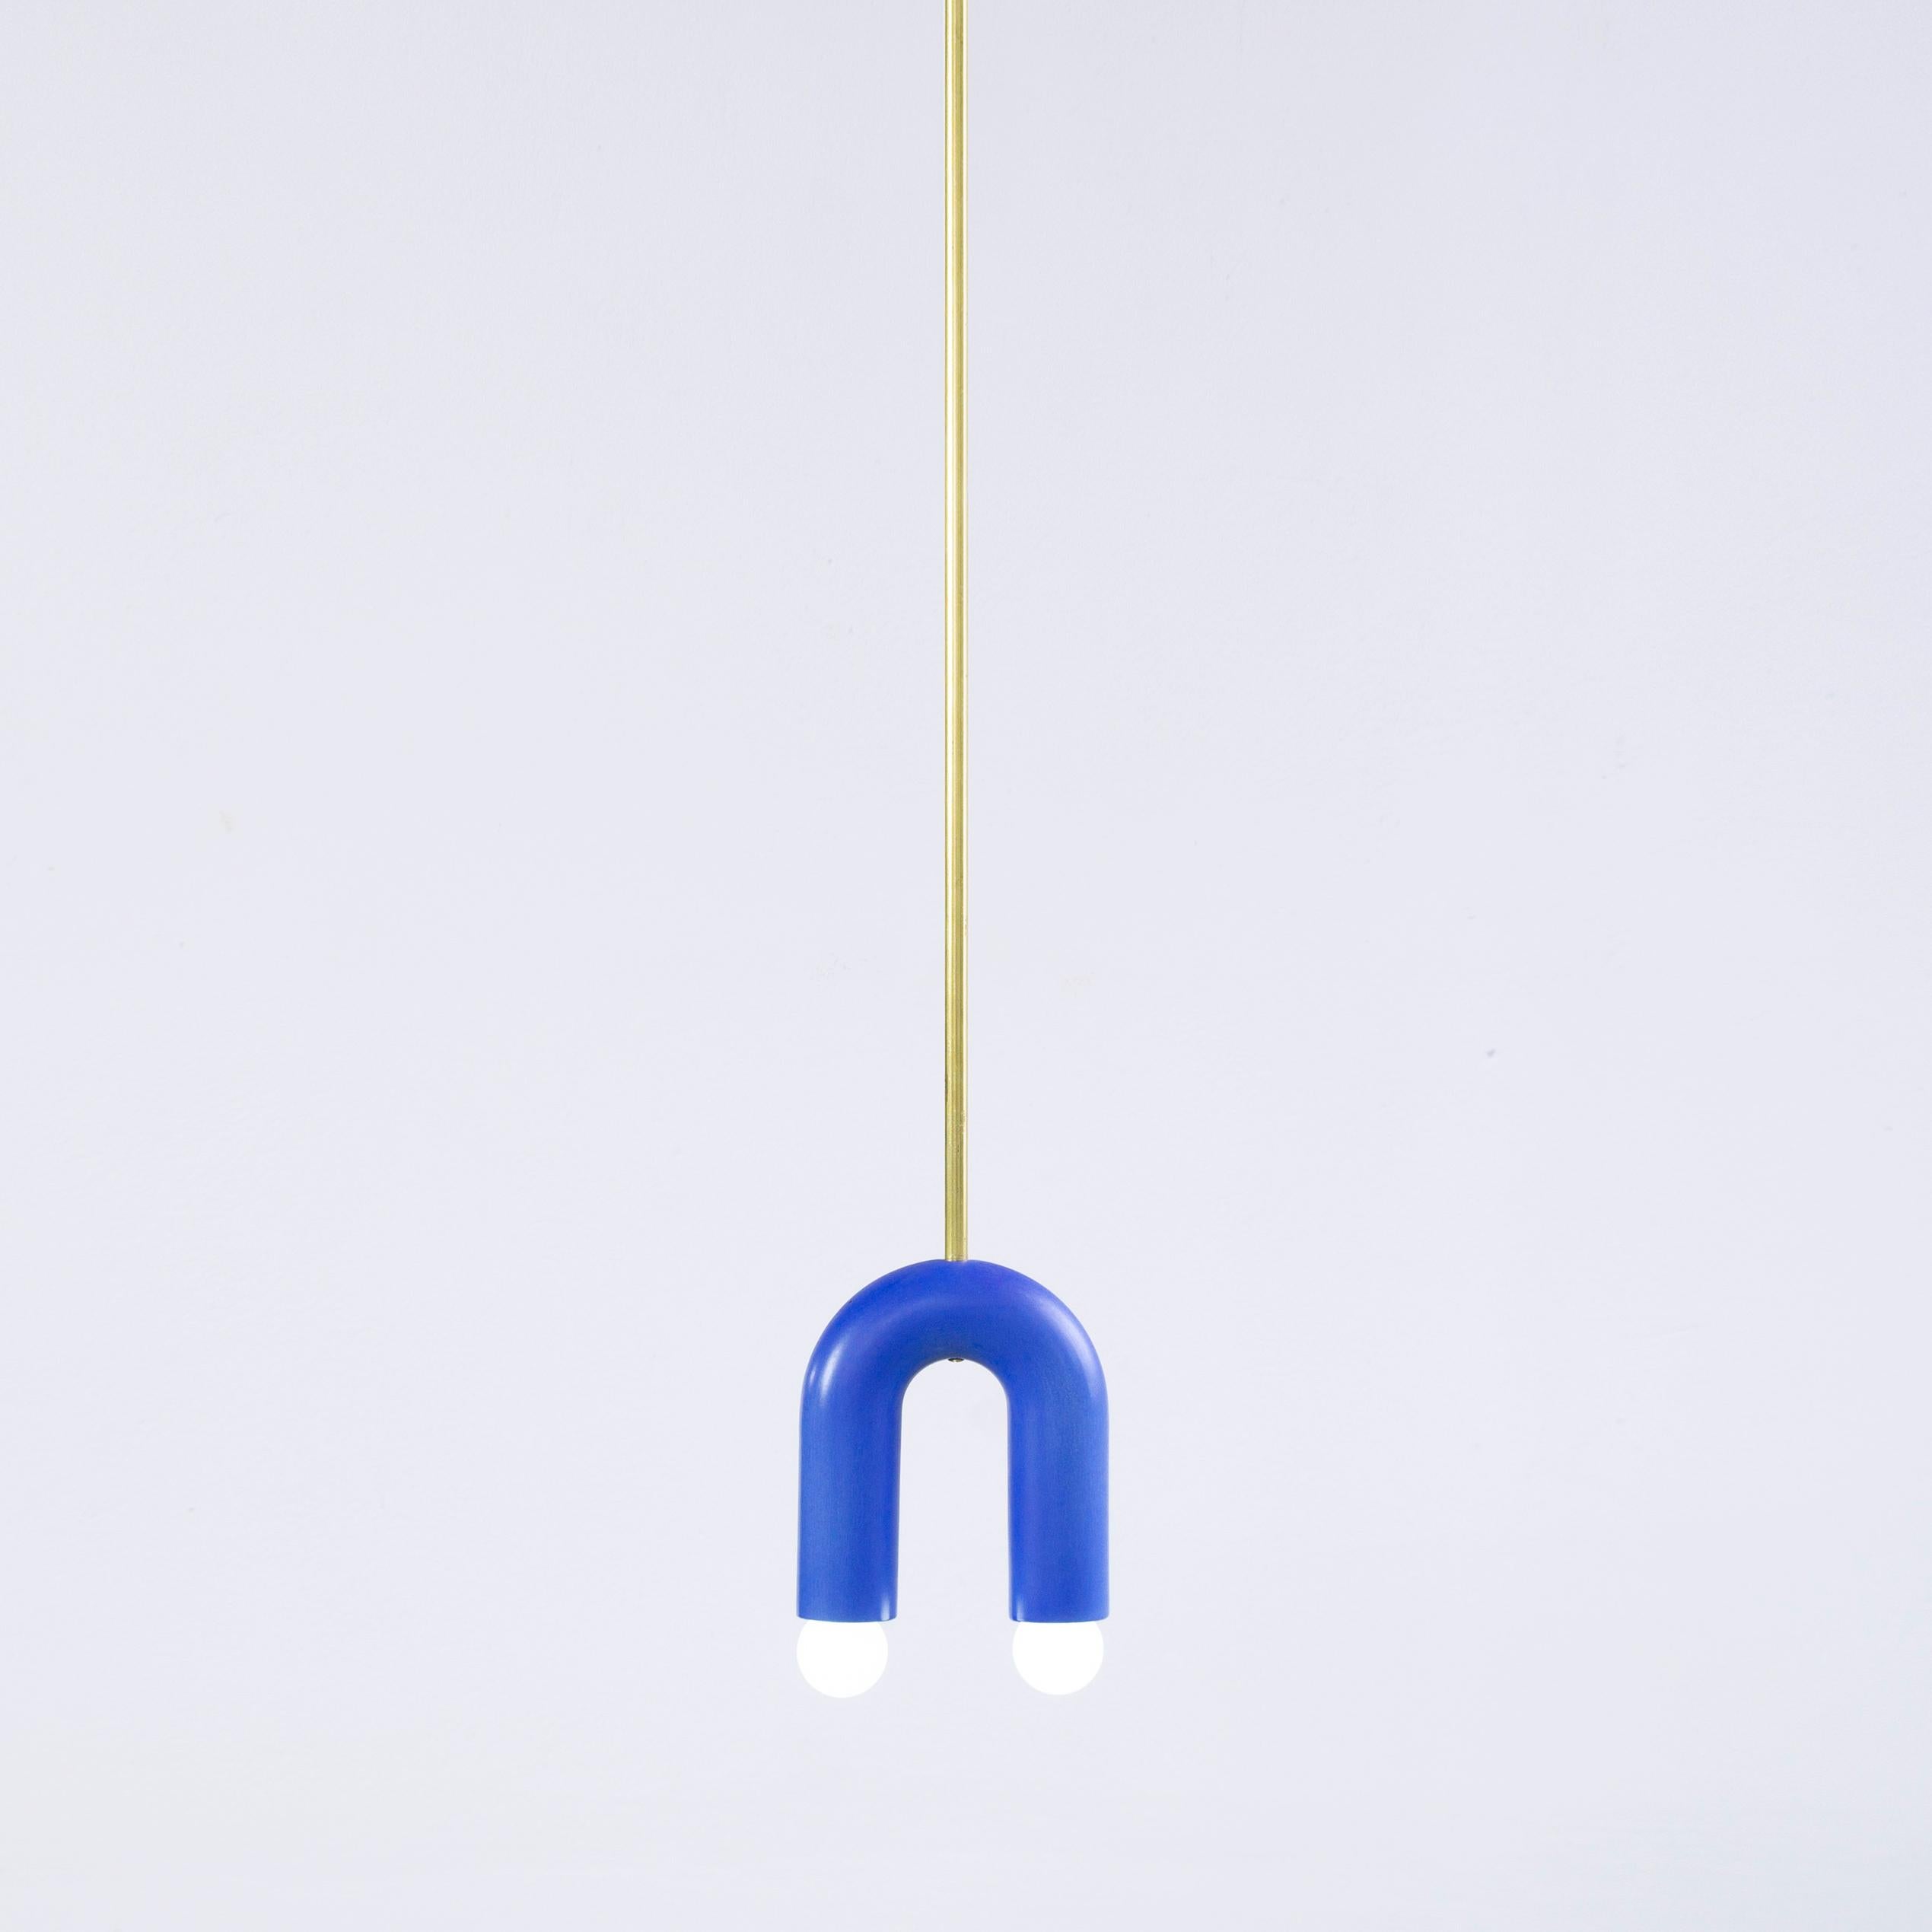 Cobalt TRN A1 pendant lamp by Pani Jurek.
Dimensions: D 5 x W 15 x H 18 cm.
Material: ceramic and brass.
Available in other colors.
Lamps from the TRN collection hang on a metal tube, not on a cable. This allows the lamp to be mounted in a specific